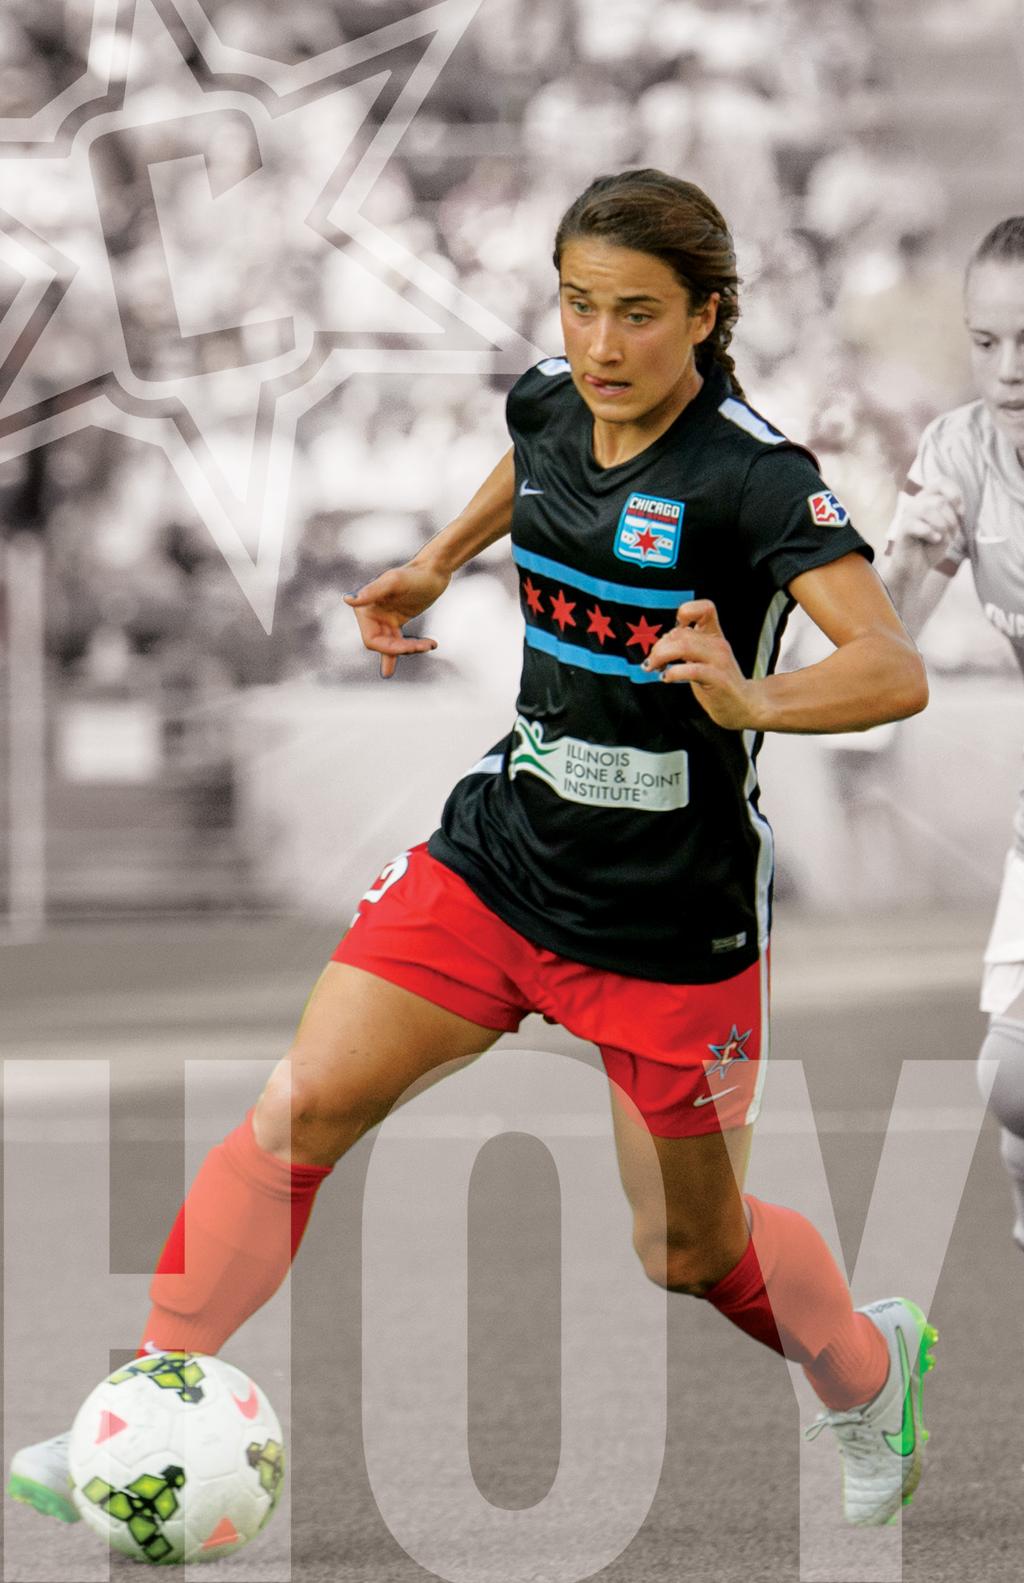 2 Jen Hoy POSITION: FORWARD HEIGHT: 5-5 BORN: JANUARY 18, 1991 HOMETOWN: SELLERSVILLE, PA COLLEGE: PRINCETON UNIVERSITY INTERNATIONAL: 2014: Member of U-23 USWNT that participated in Six Nations